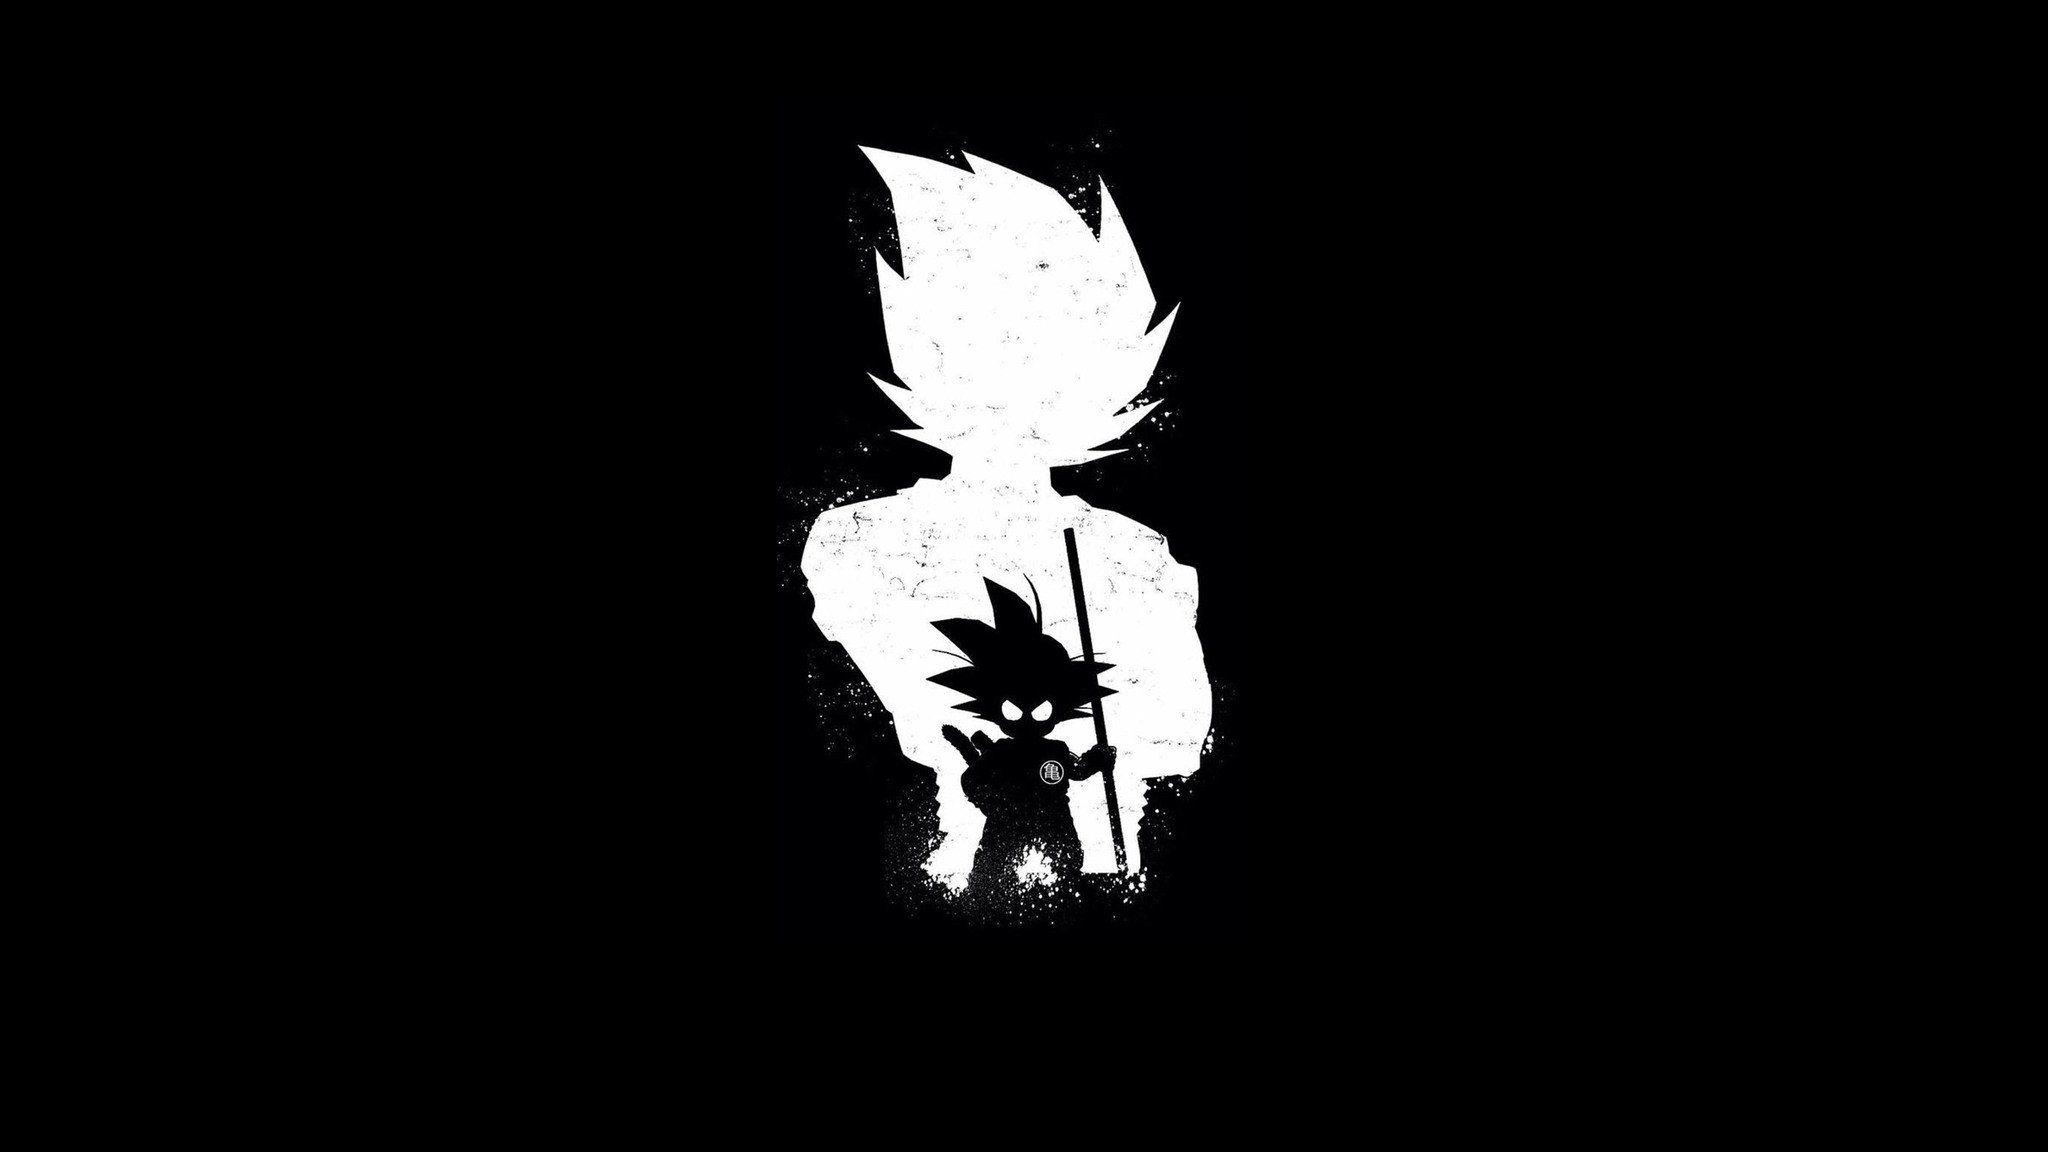 Anime Black and White Wallpapers - Top Free Anime Black and White